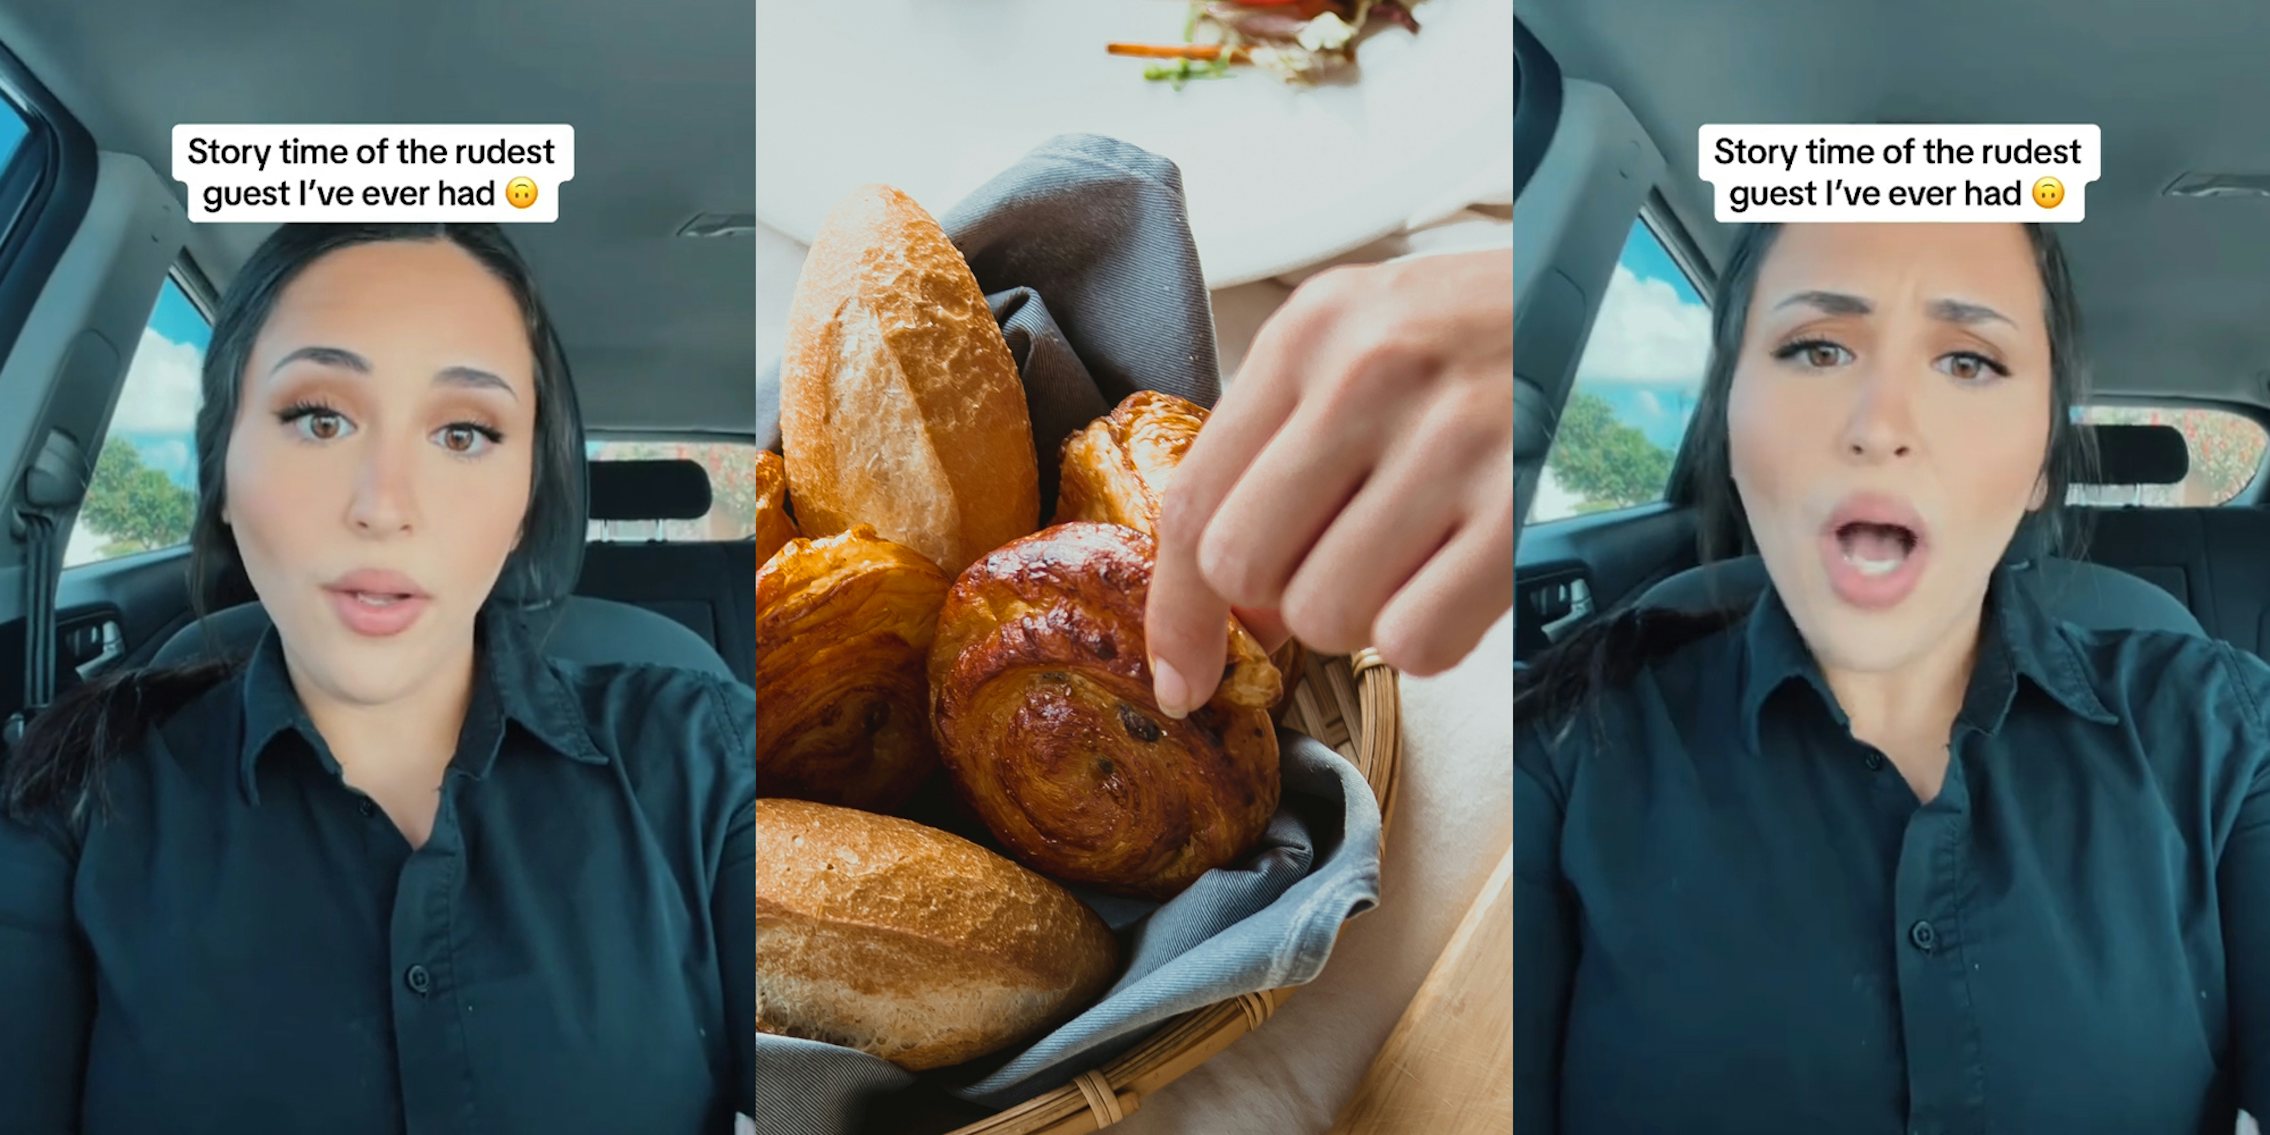 server speaking in car with caption 'Story time of the rudest guest I've ever had' (l) hand reaching into bread basket on table (c) server speaking in car with caption 'Story time of the rudest guest I've ever had' (r)